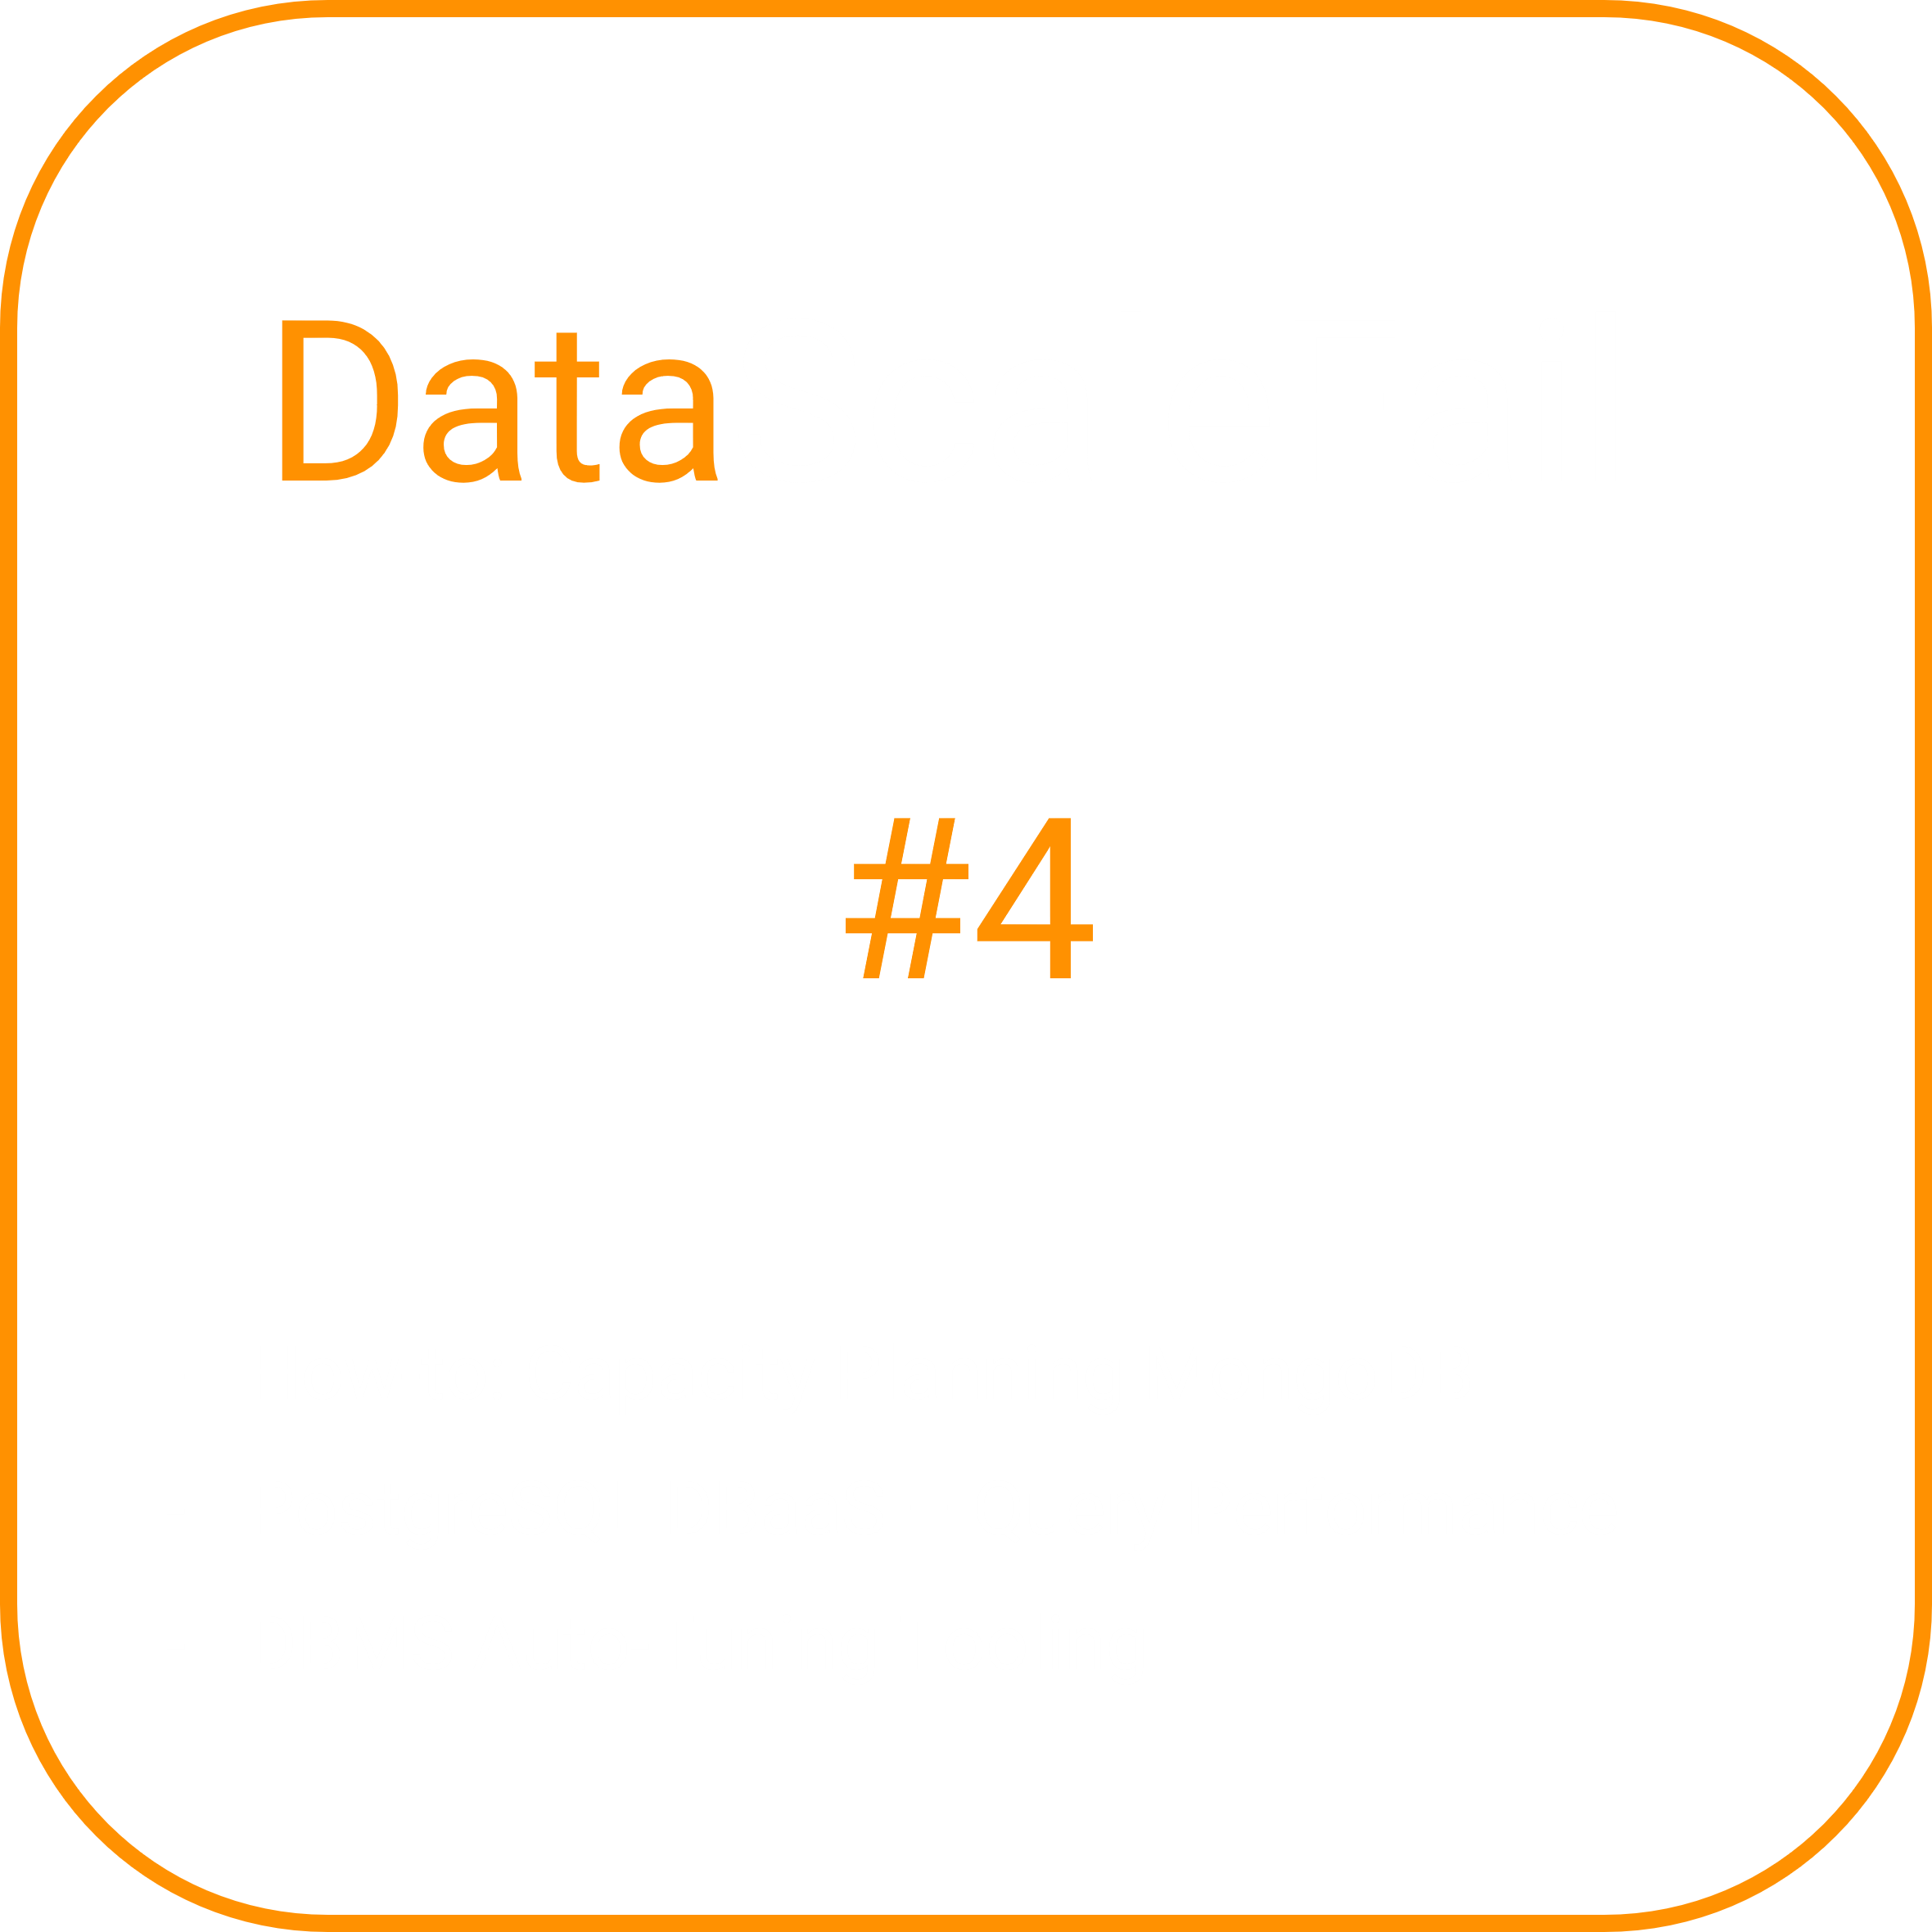 Thumbnail for DataScaleFail #4 - How-to: MongoDB Capacity Planning, PostgreSQL DBaaS Query Performance & DBMS Auto-Tuning